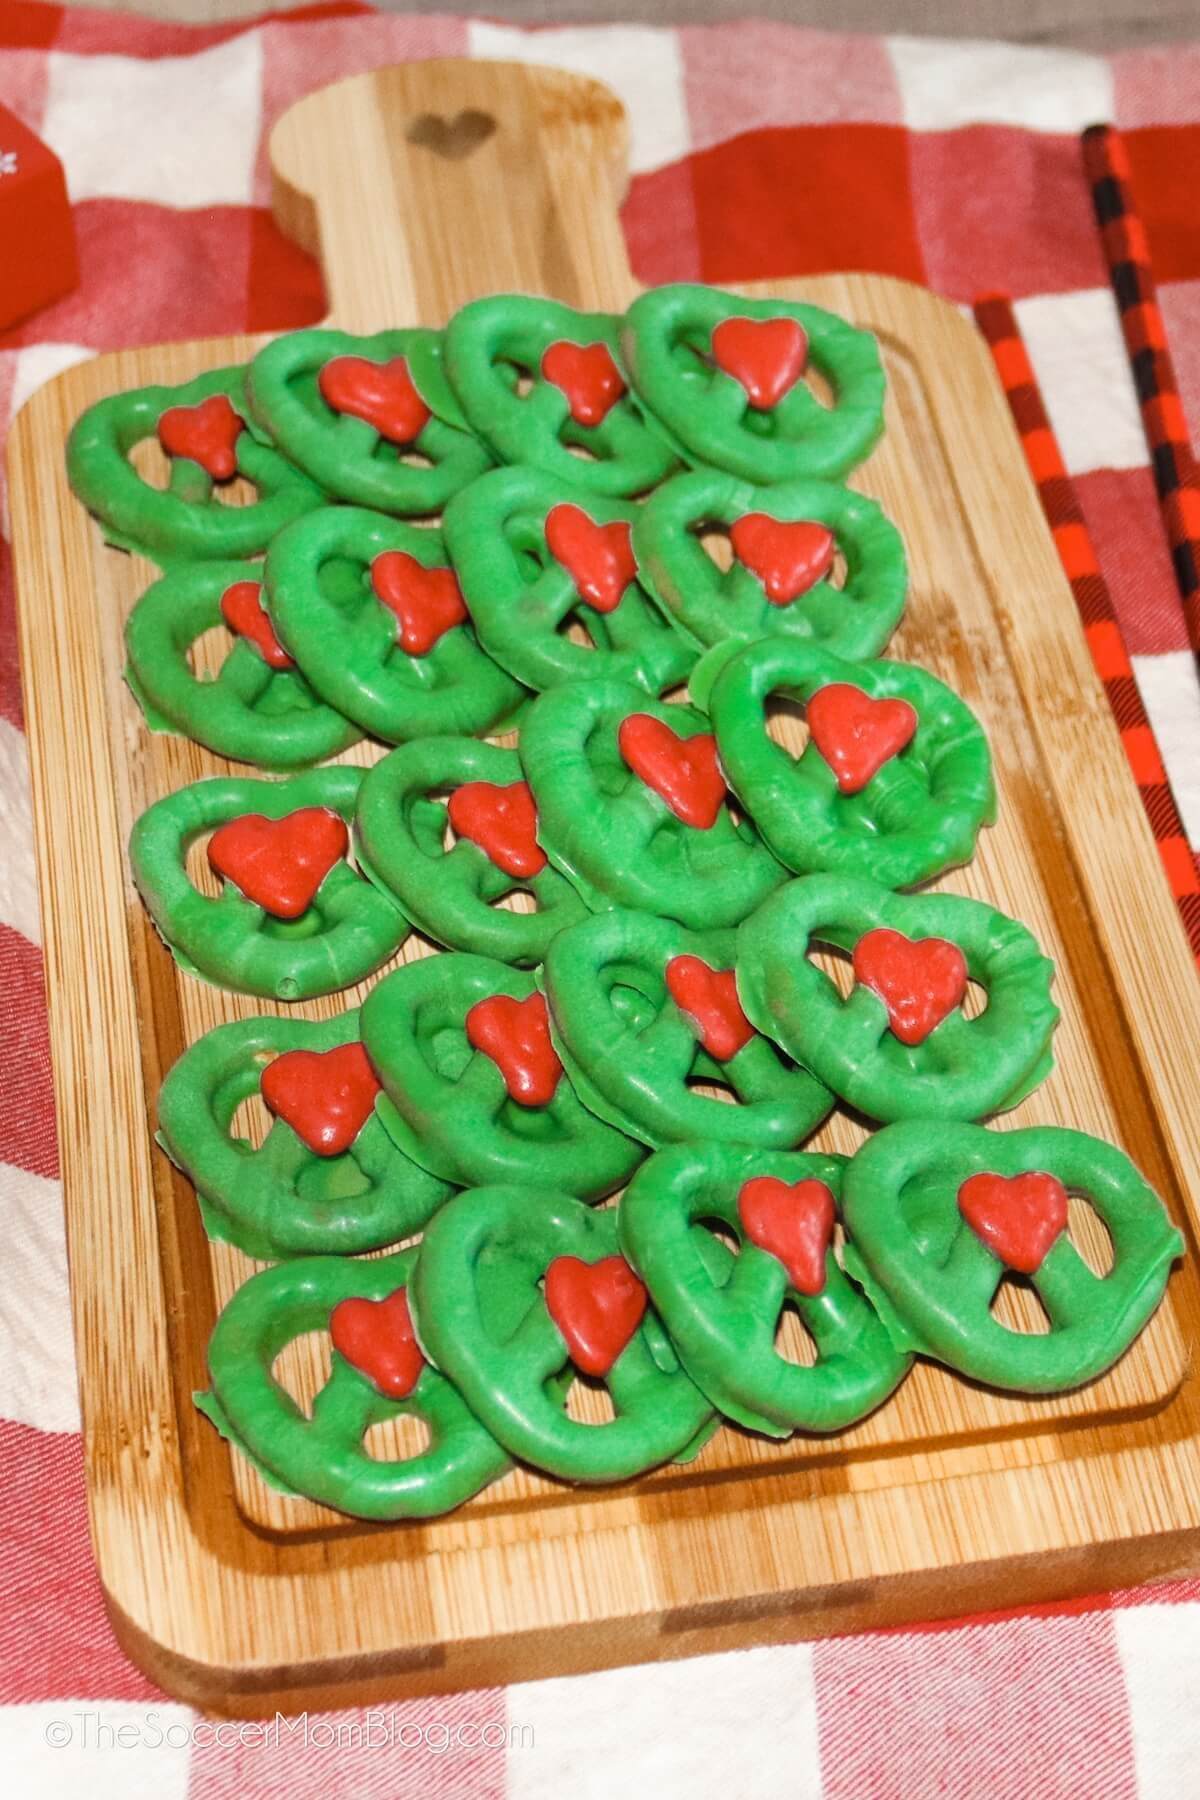 grinch pretzels dipped in green chocolate with a red chocolate heart in the middle.